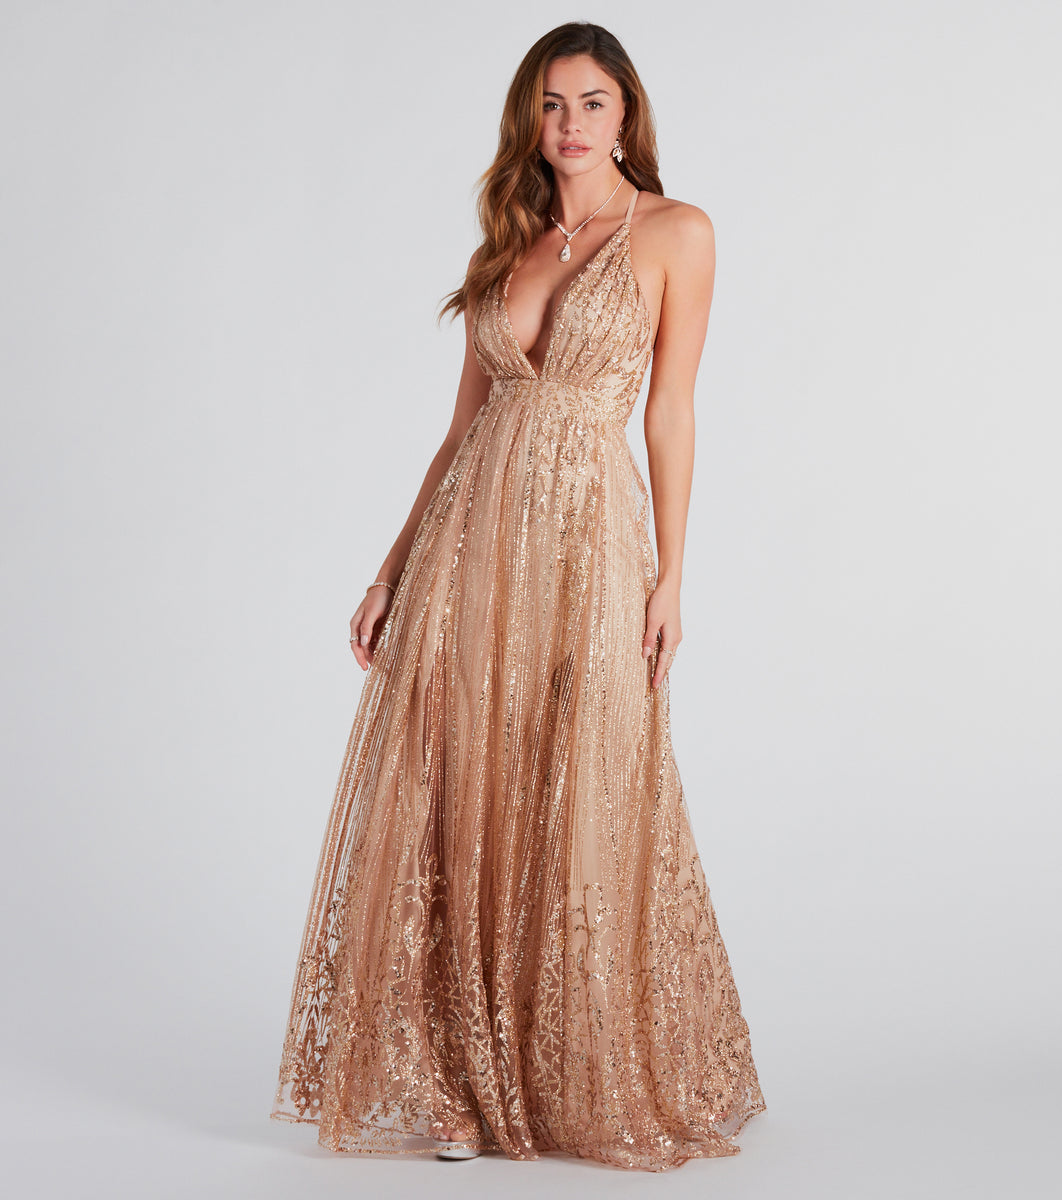 Sequined Gold Flowy Tulle Aline Long Formal Dress with Illusion Neckline -  $123.9768 #MX16038 